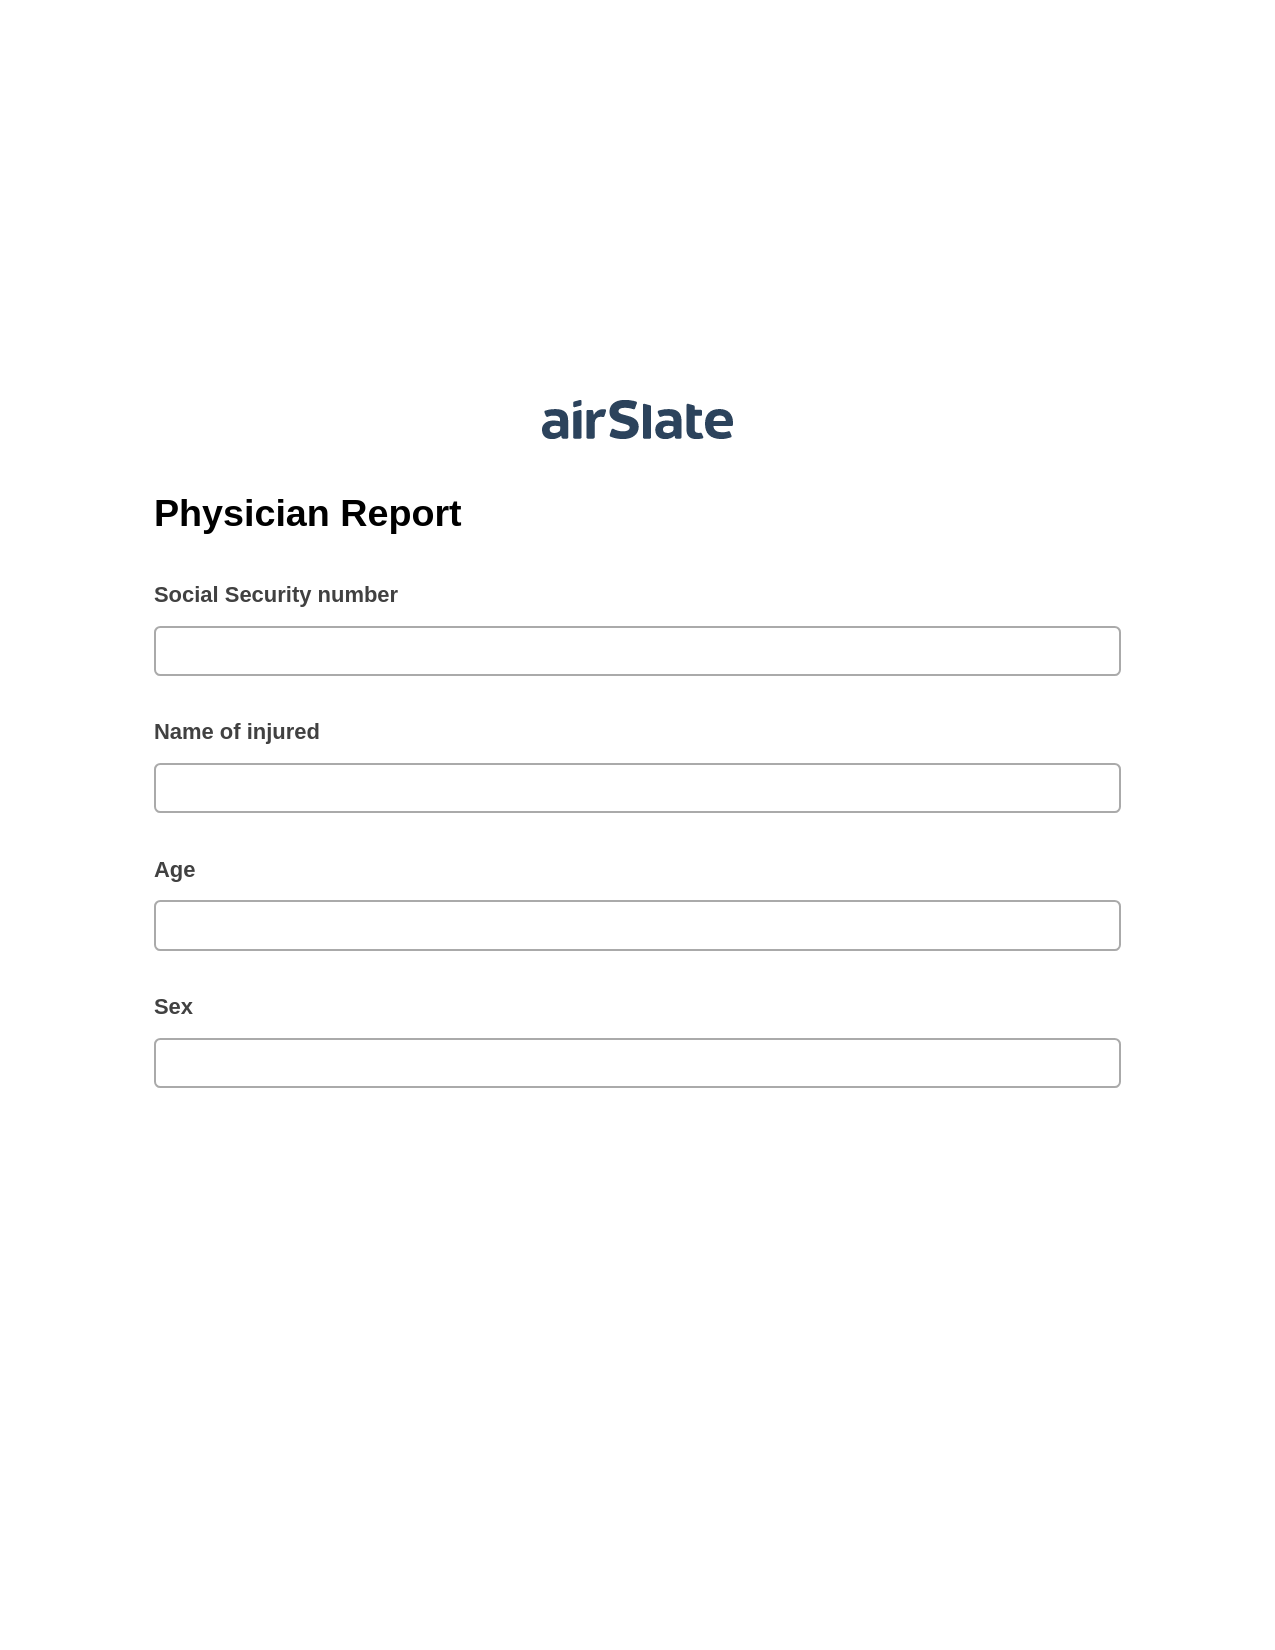 Physician Report Pre-fill from CSV File Bot, Update NetSuite Record Bot, Archive to OneDrive Bot